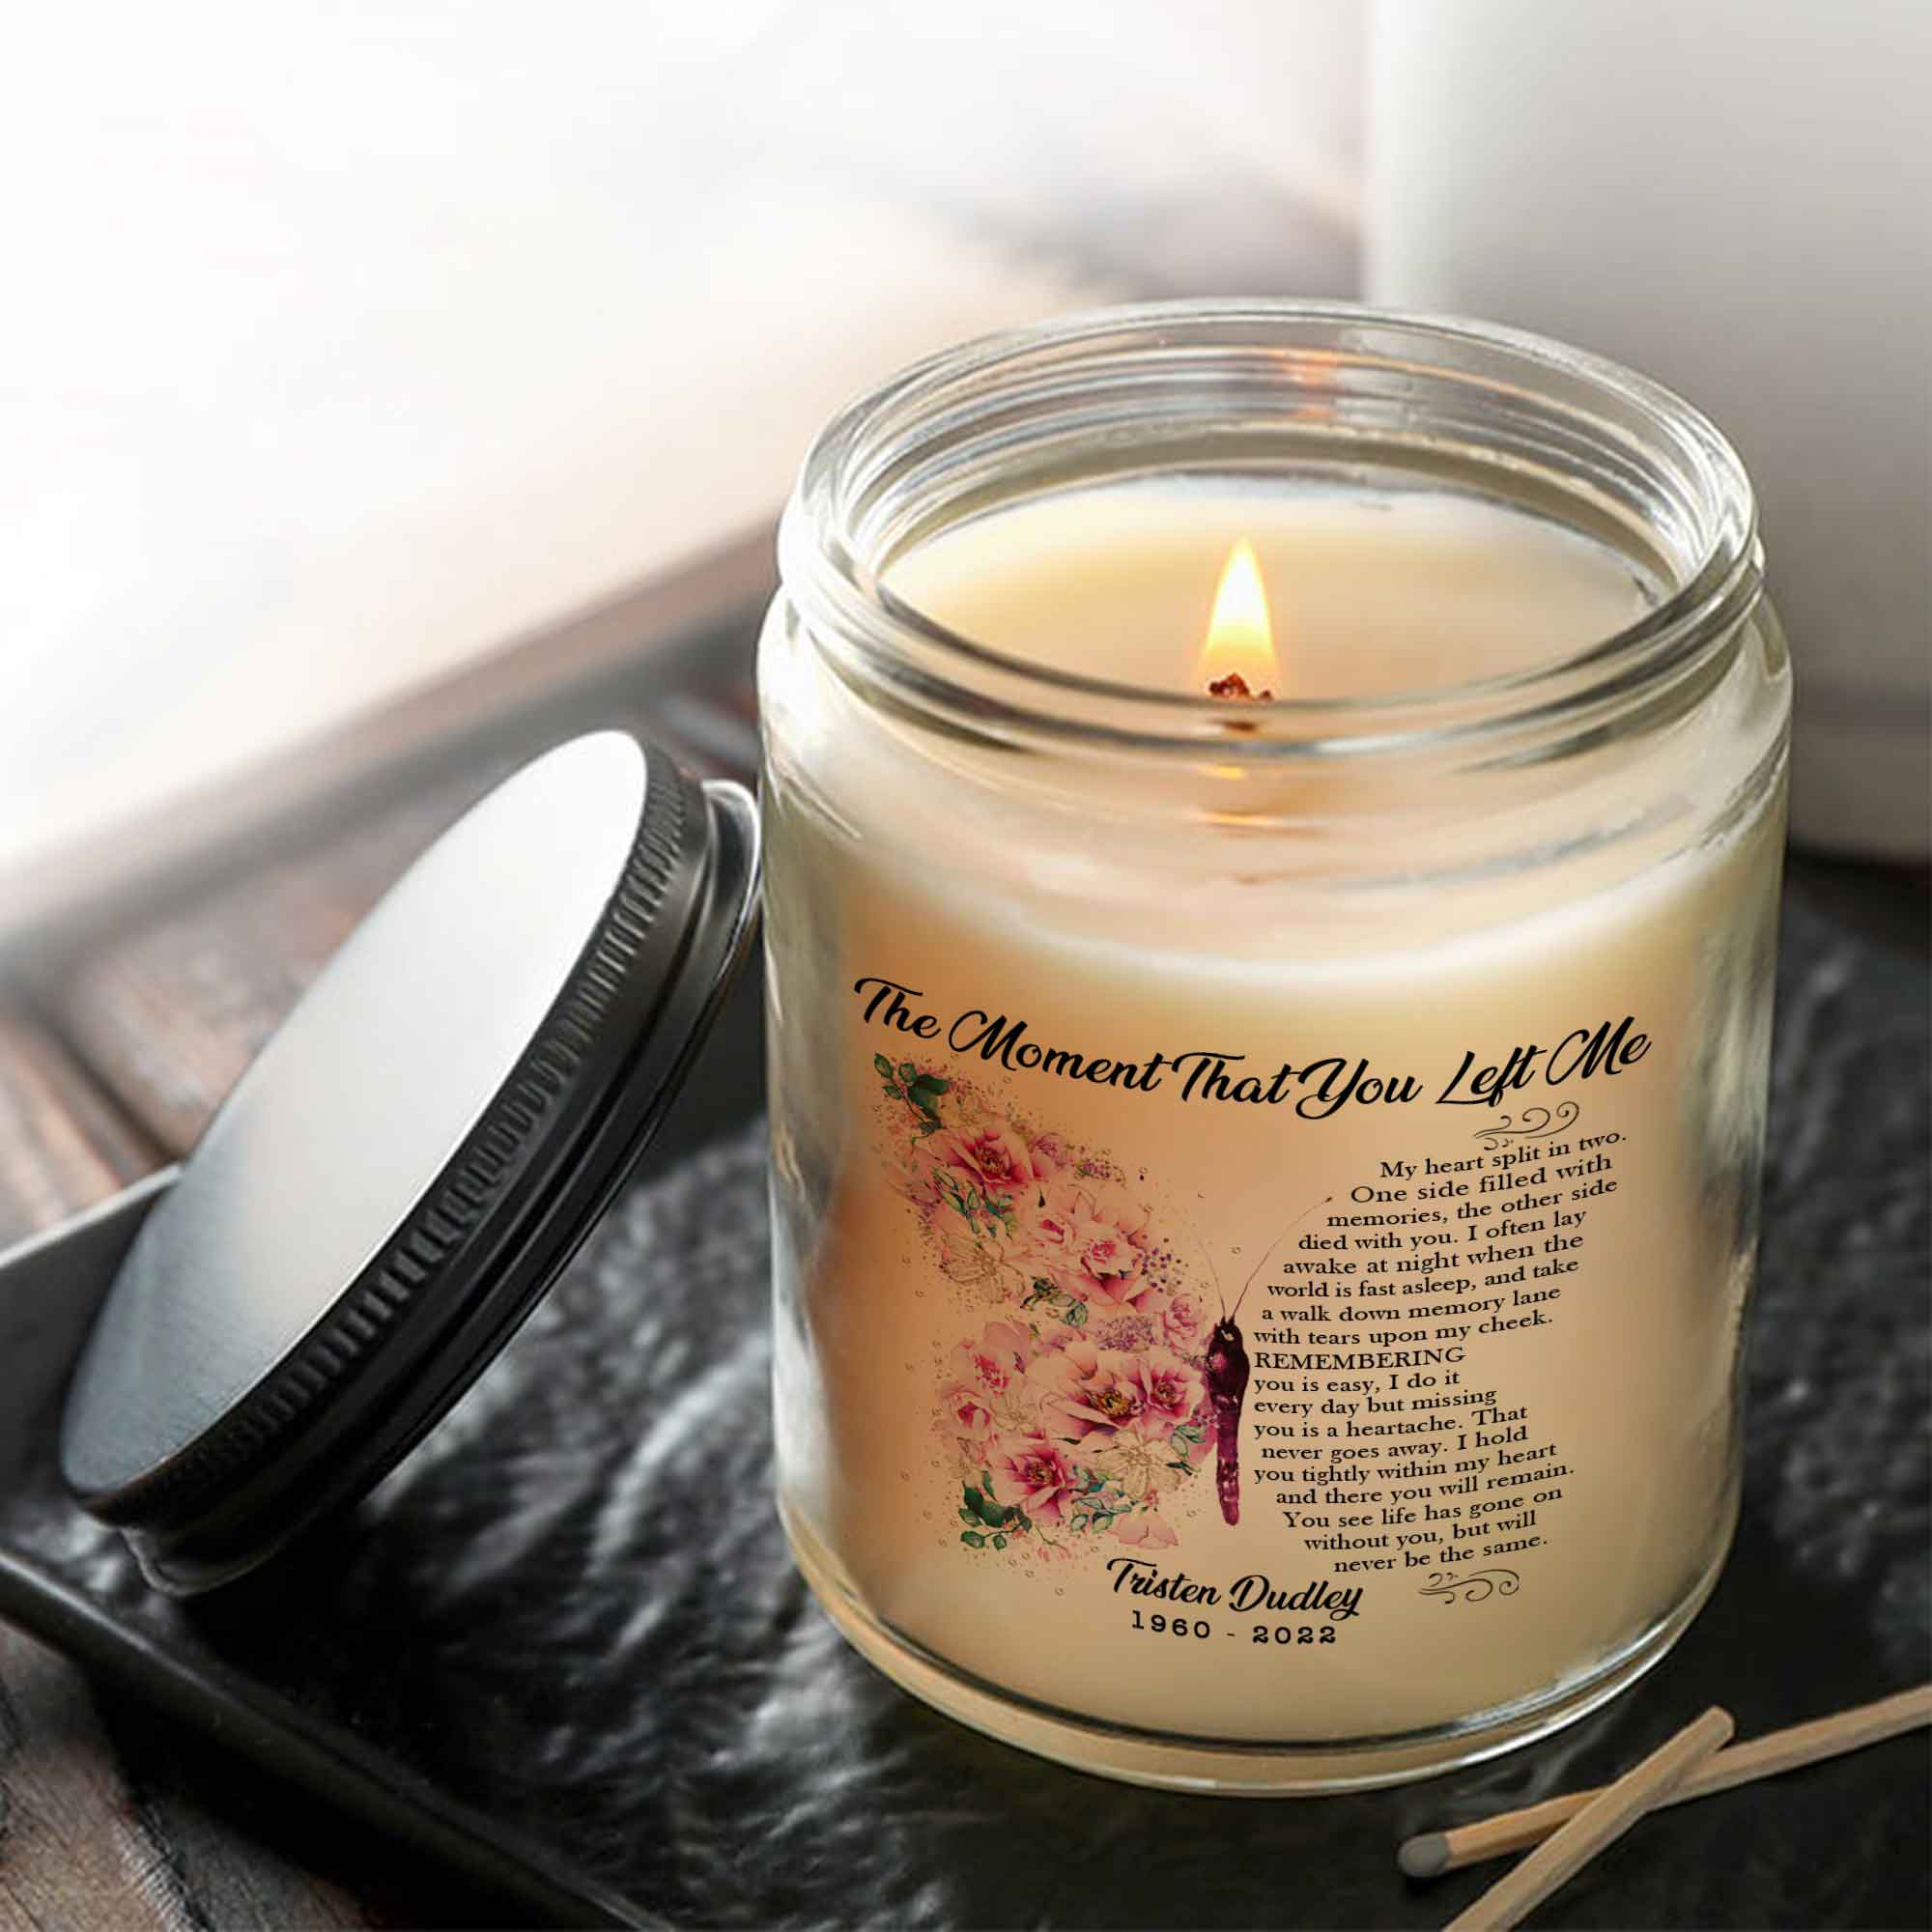 The Moment That You Left Me, Loss Of Mother Personalized Sympathy Candle, Remembrance Candle For Mothers Day Gift